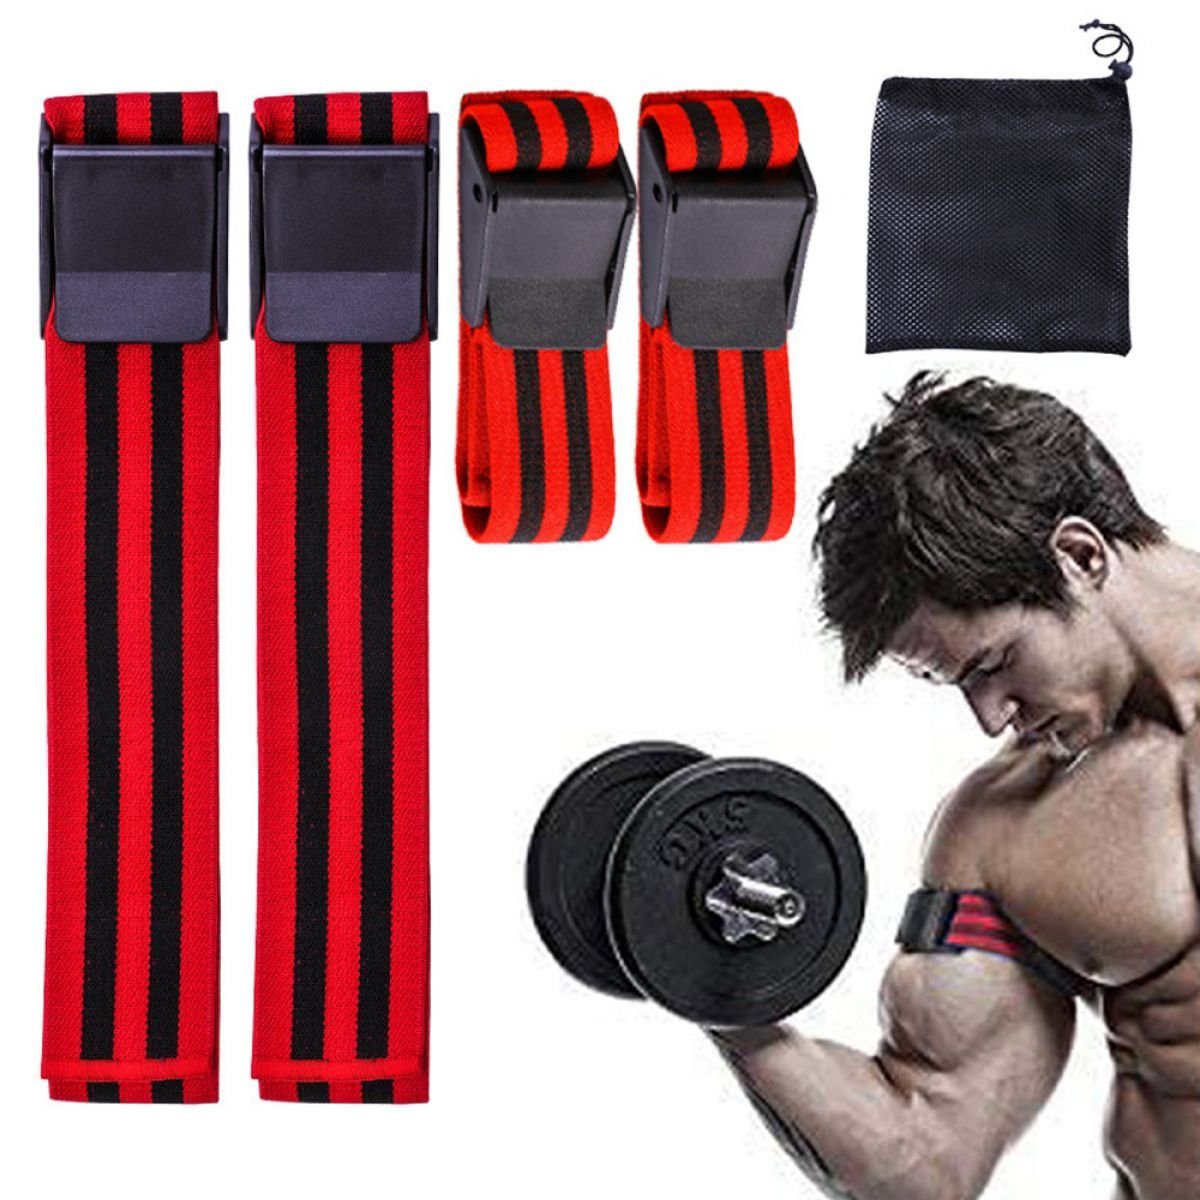 Juoungle Hantel-Set Occlusion Training Bands, Blood Flow Restriction Bands Rot